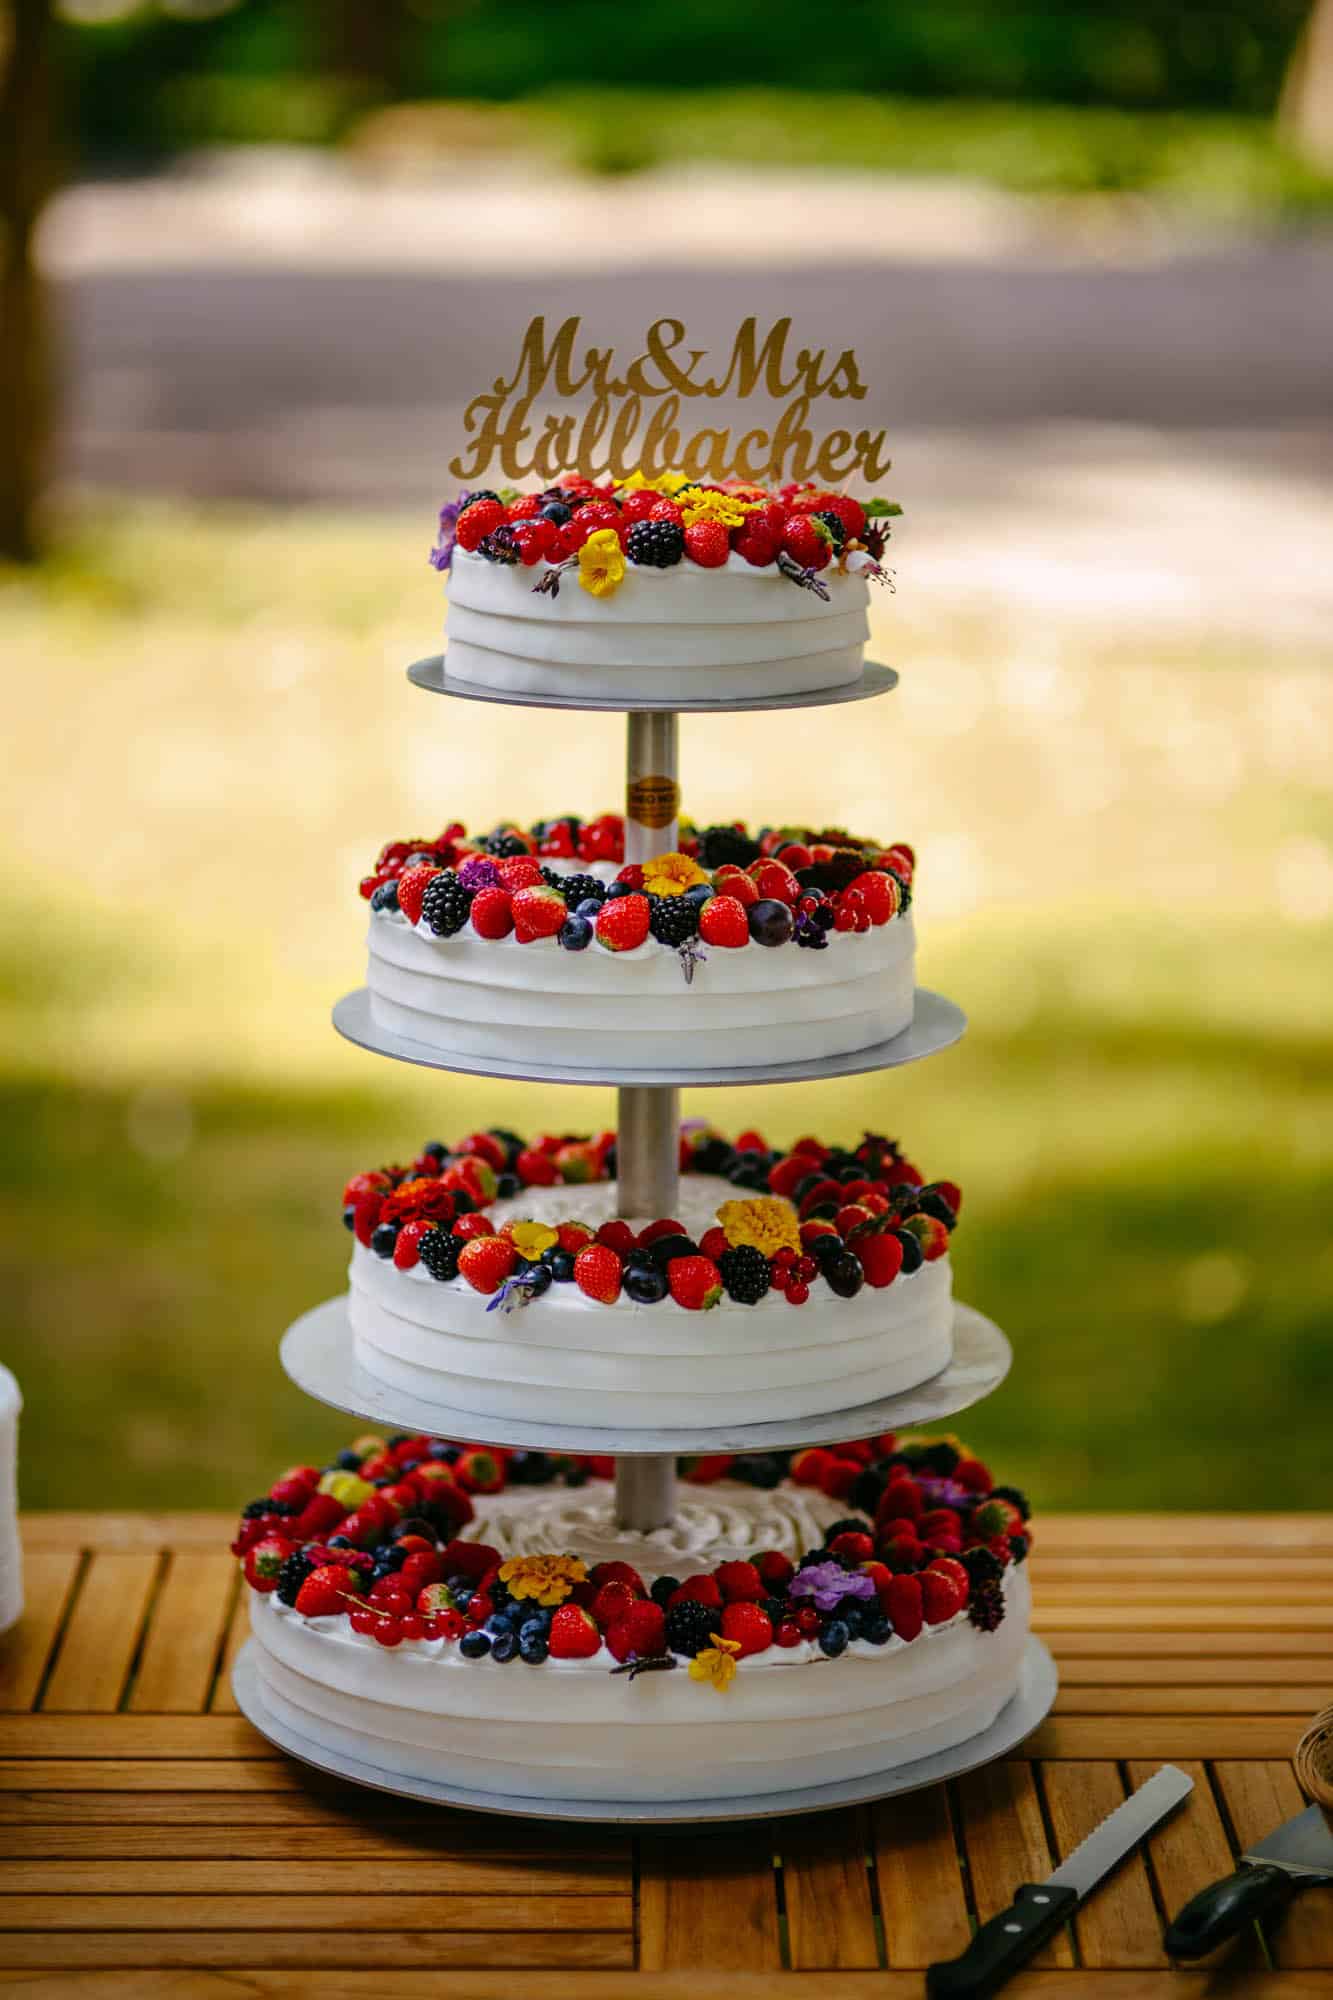 A wedding cake with berries on top.